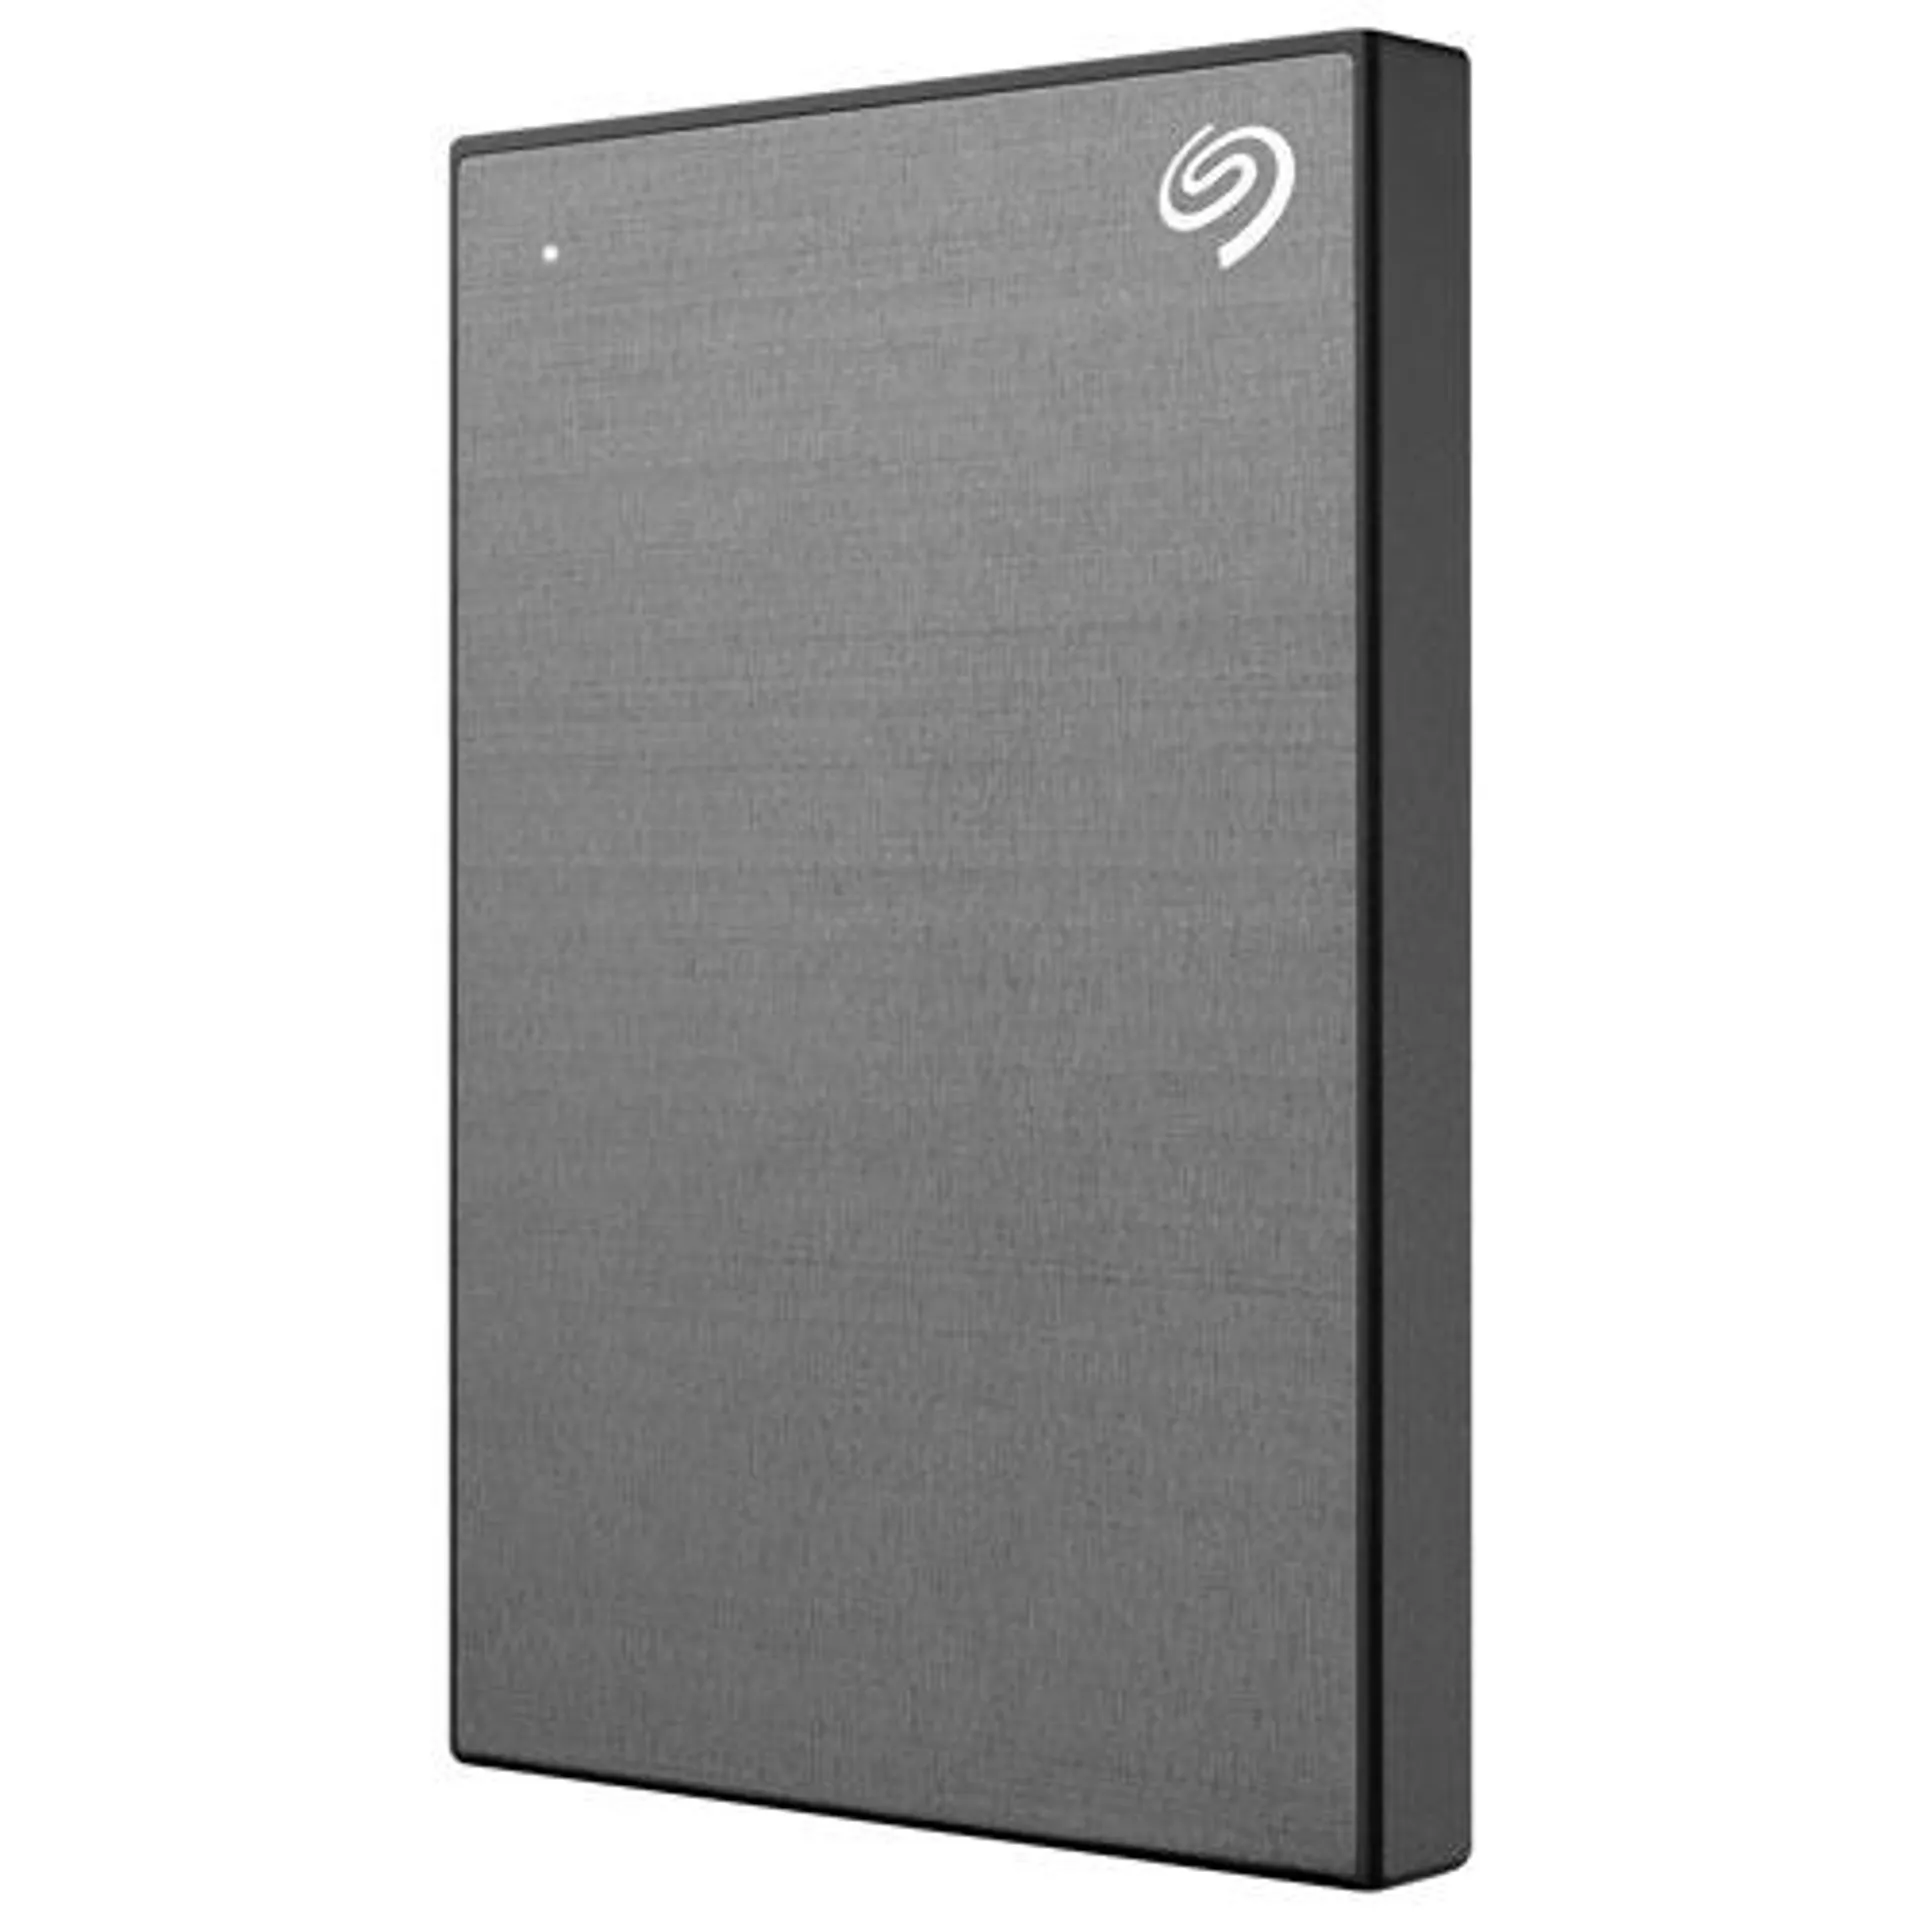 Seagate One Touch 2TB USB 3.0 Portable External Hard Drive (STKB2000404) - Grey - Only at Best Buy